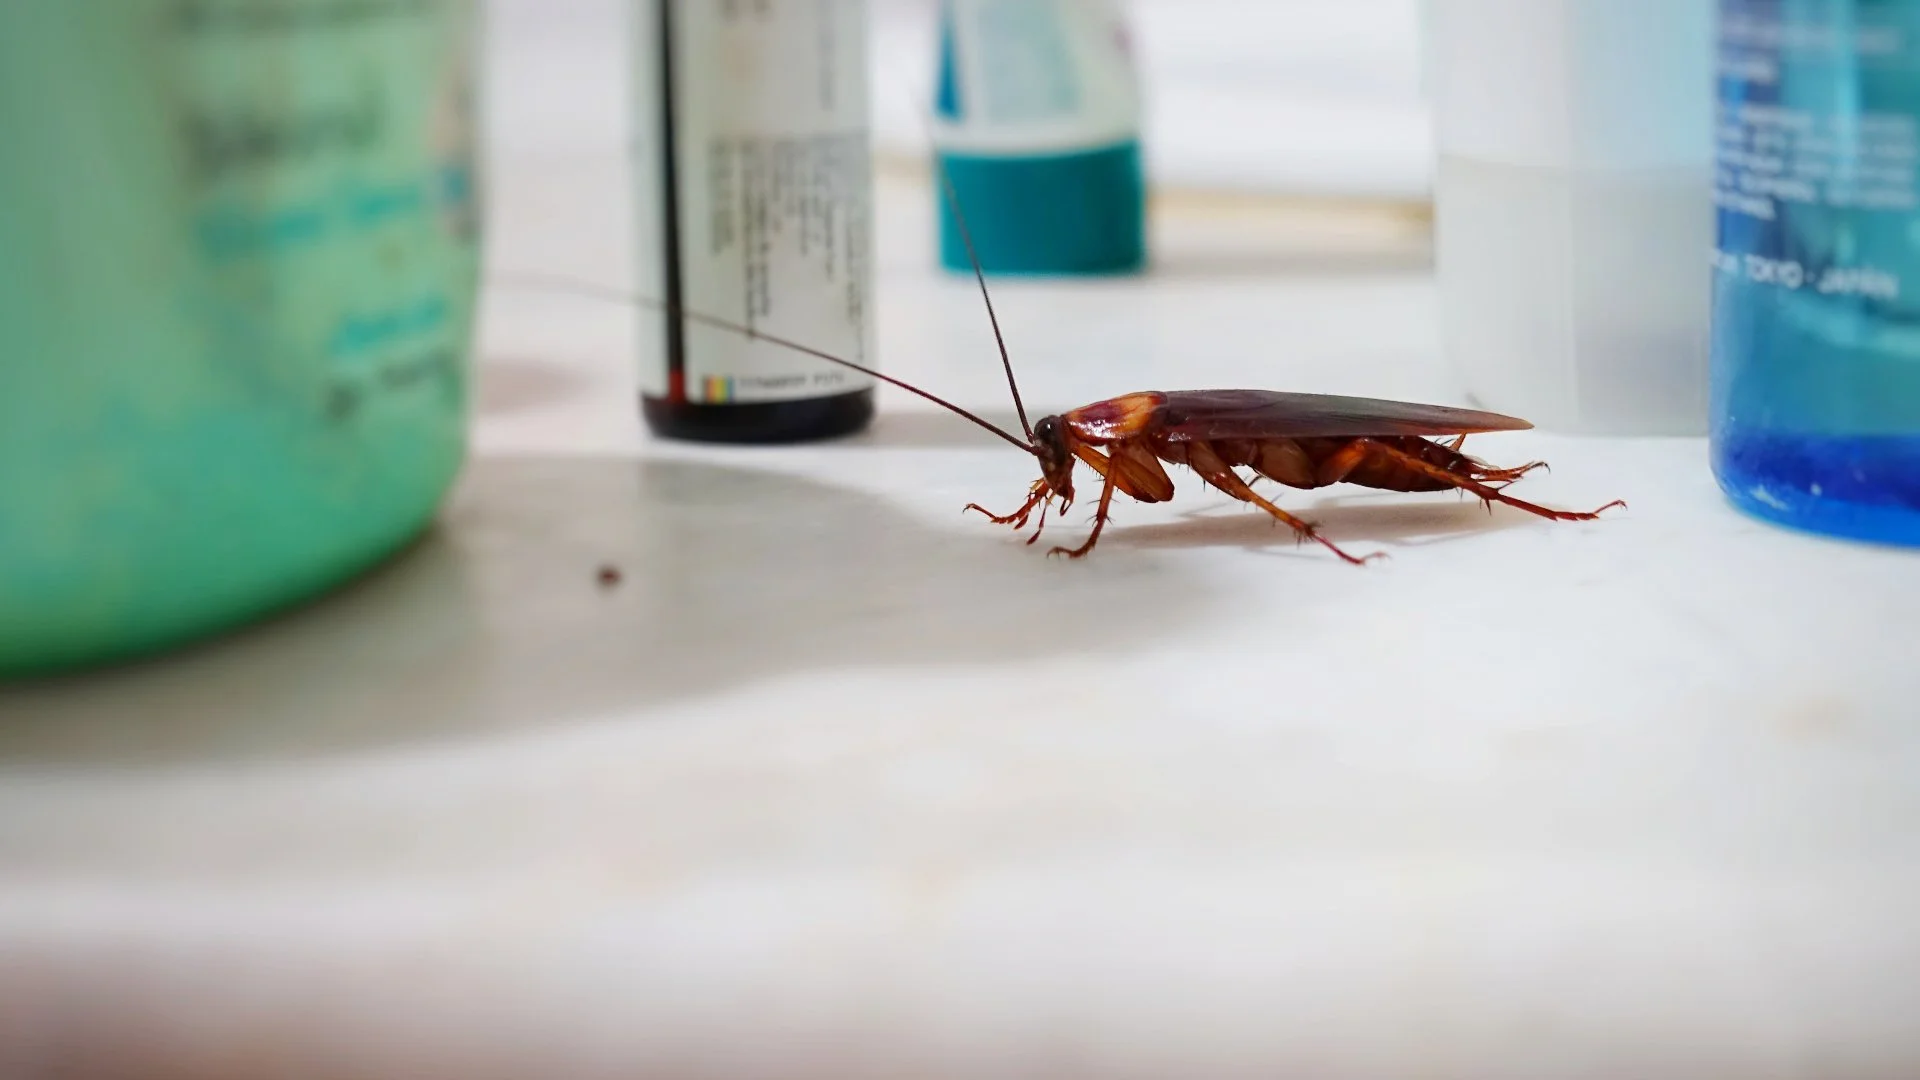 3 Tips for Getting Rid of Roaches in & Around Your Home